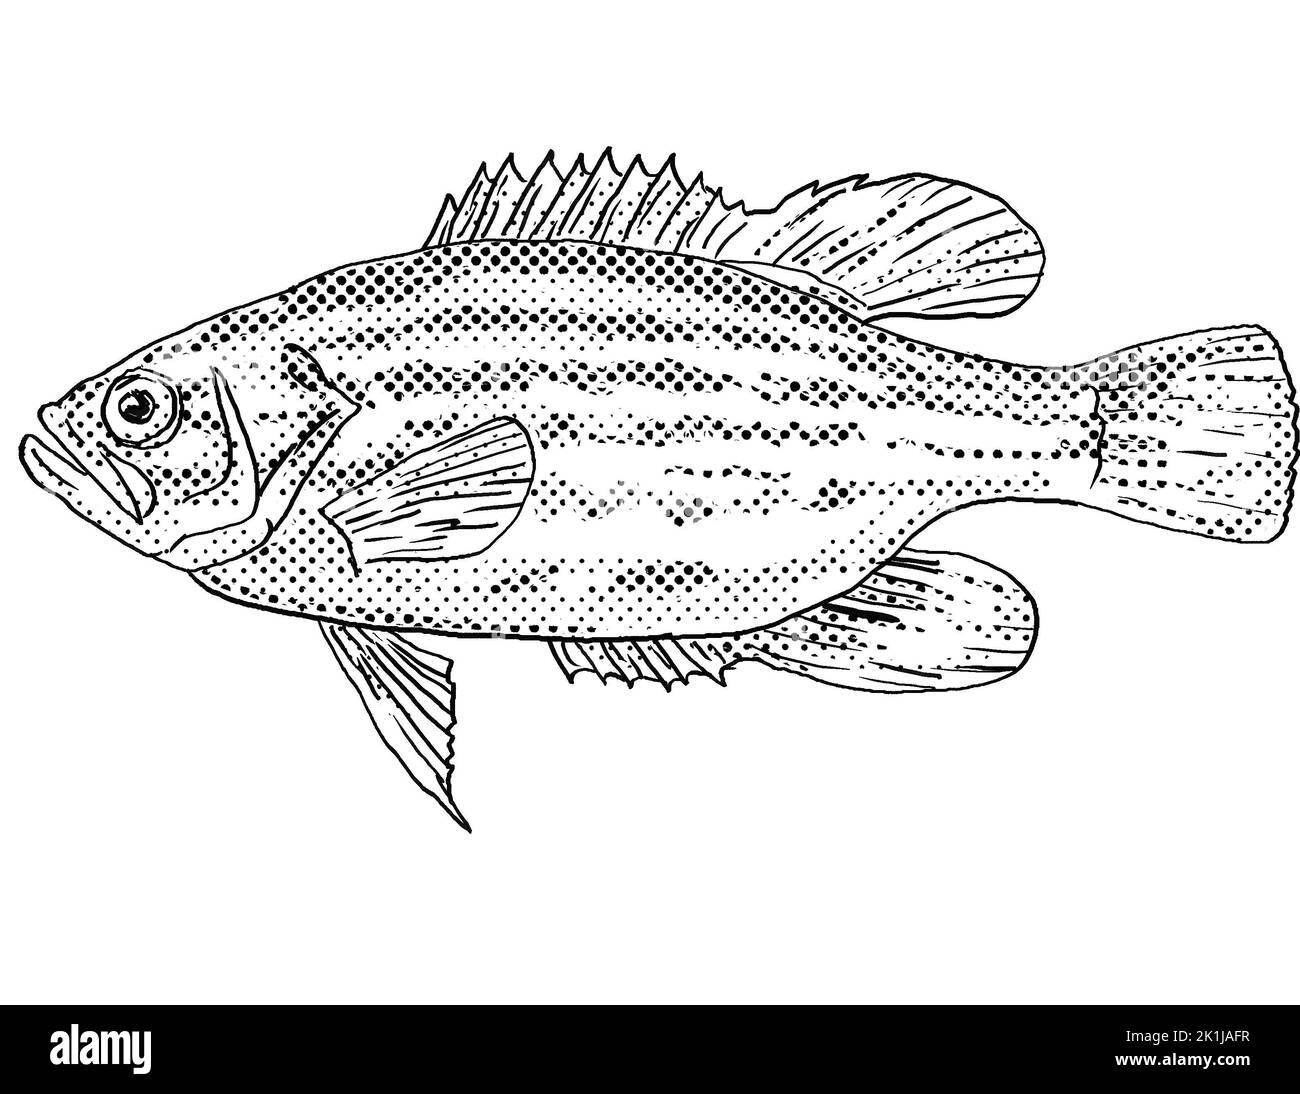 Cartoon style line drawing of a mud sunfish or Acantharchus pomotis a freshwater fish endemic to North America with halftone dots shading on isolated Stock Photo